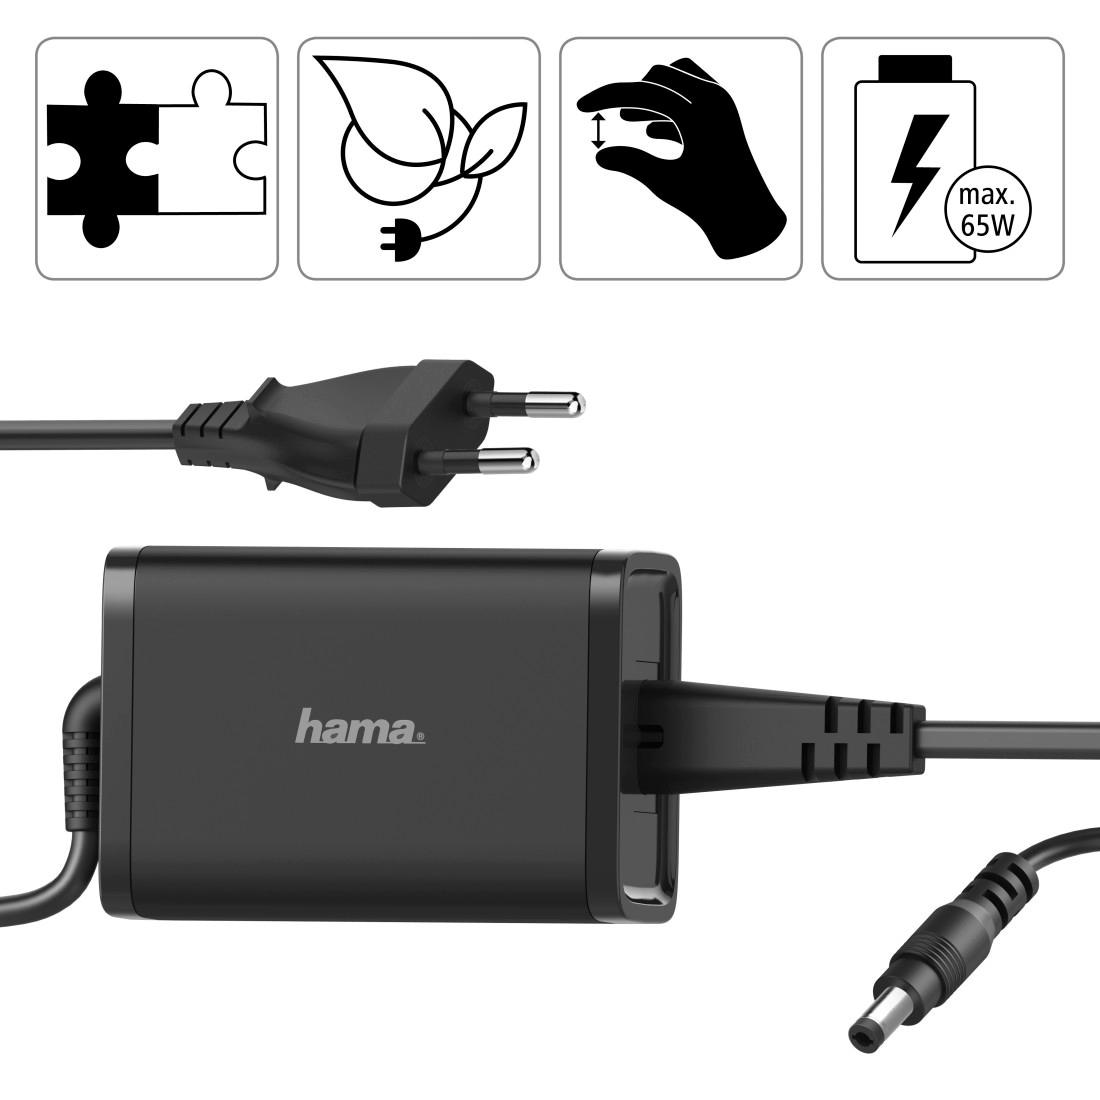 Universal-USB-C-Kfz-Notebook-Netzteil, Power Delivery (PD), 5-20V / 65W